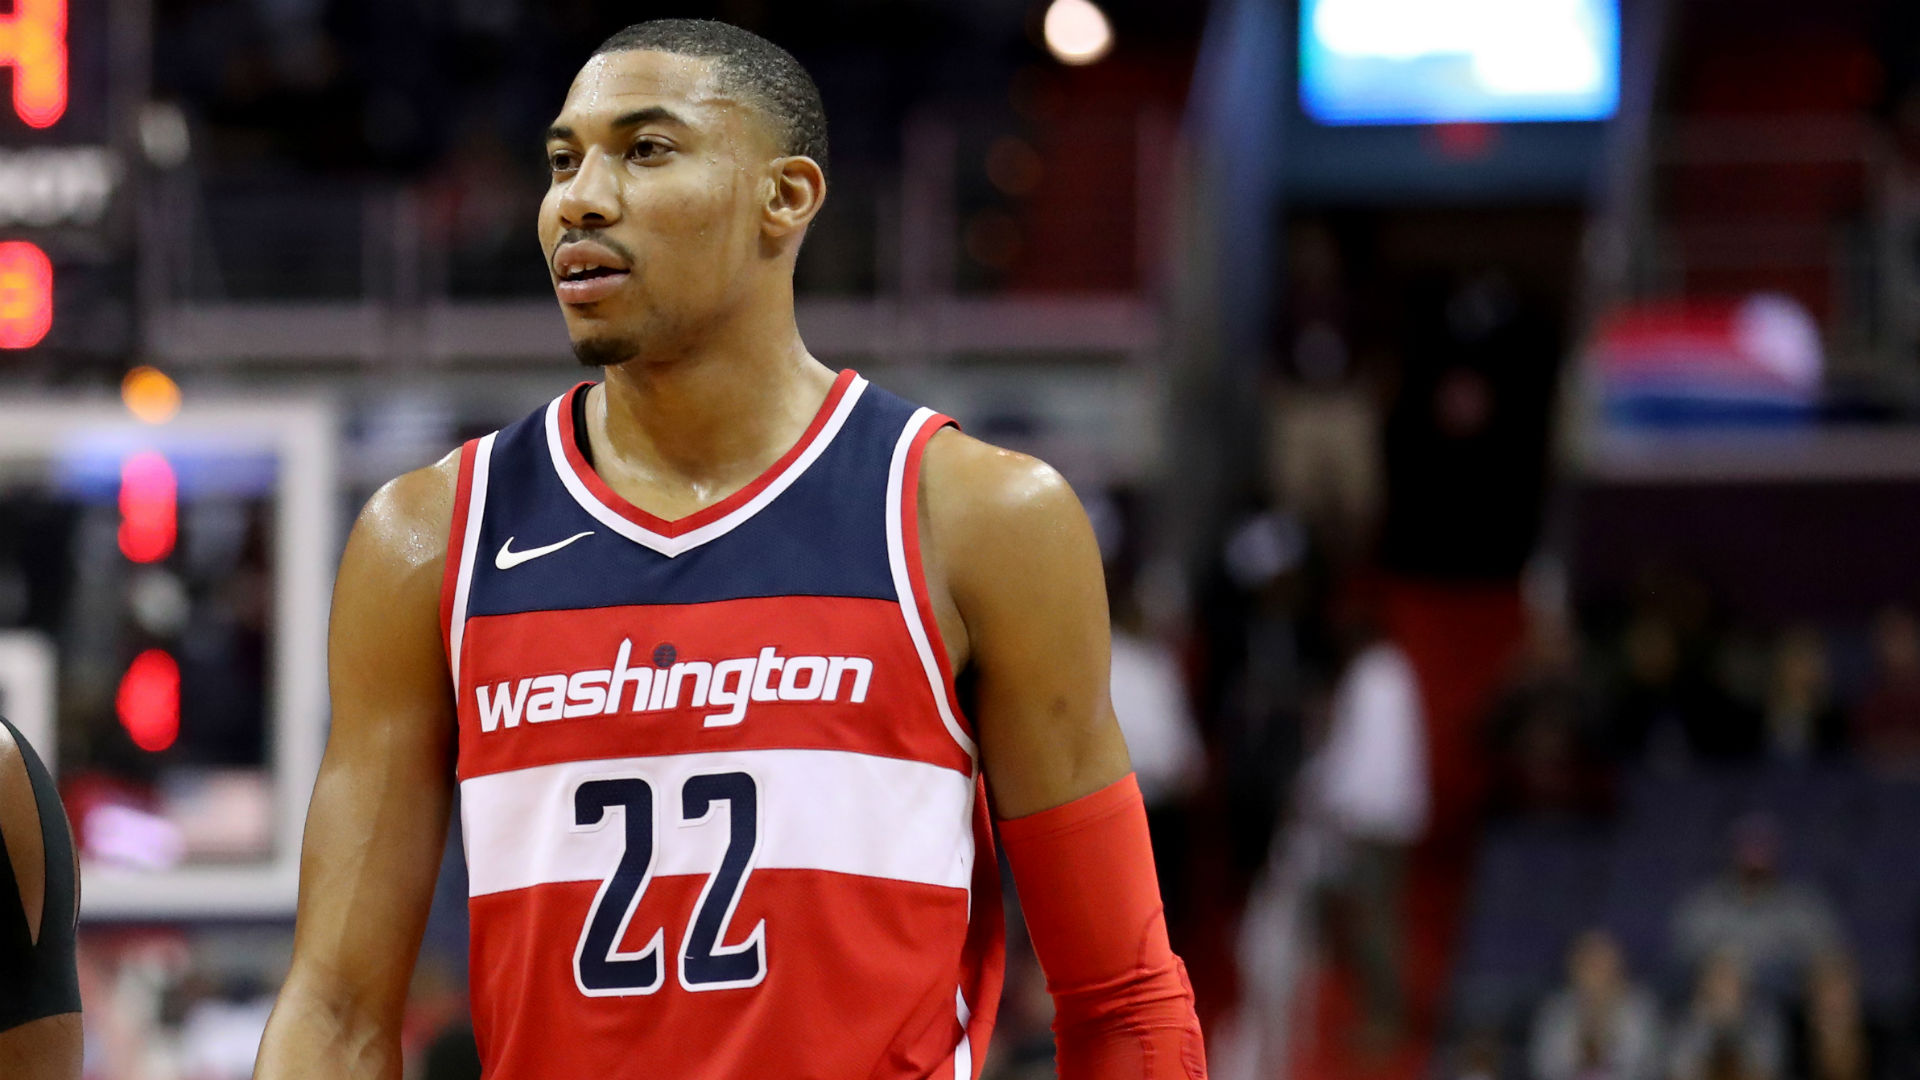 NBA playoffs 2018: Wizards’ Otto Porter Jr. out indefinitely after surgery